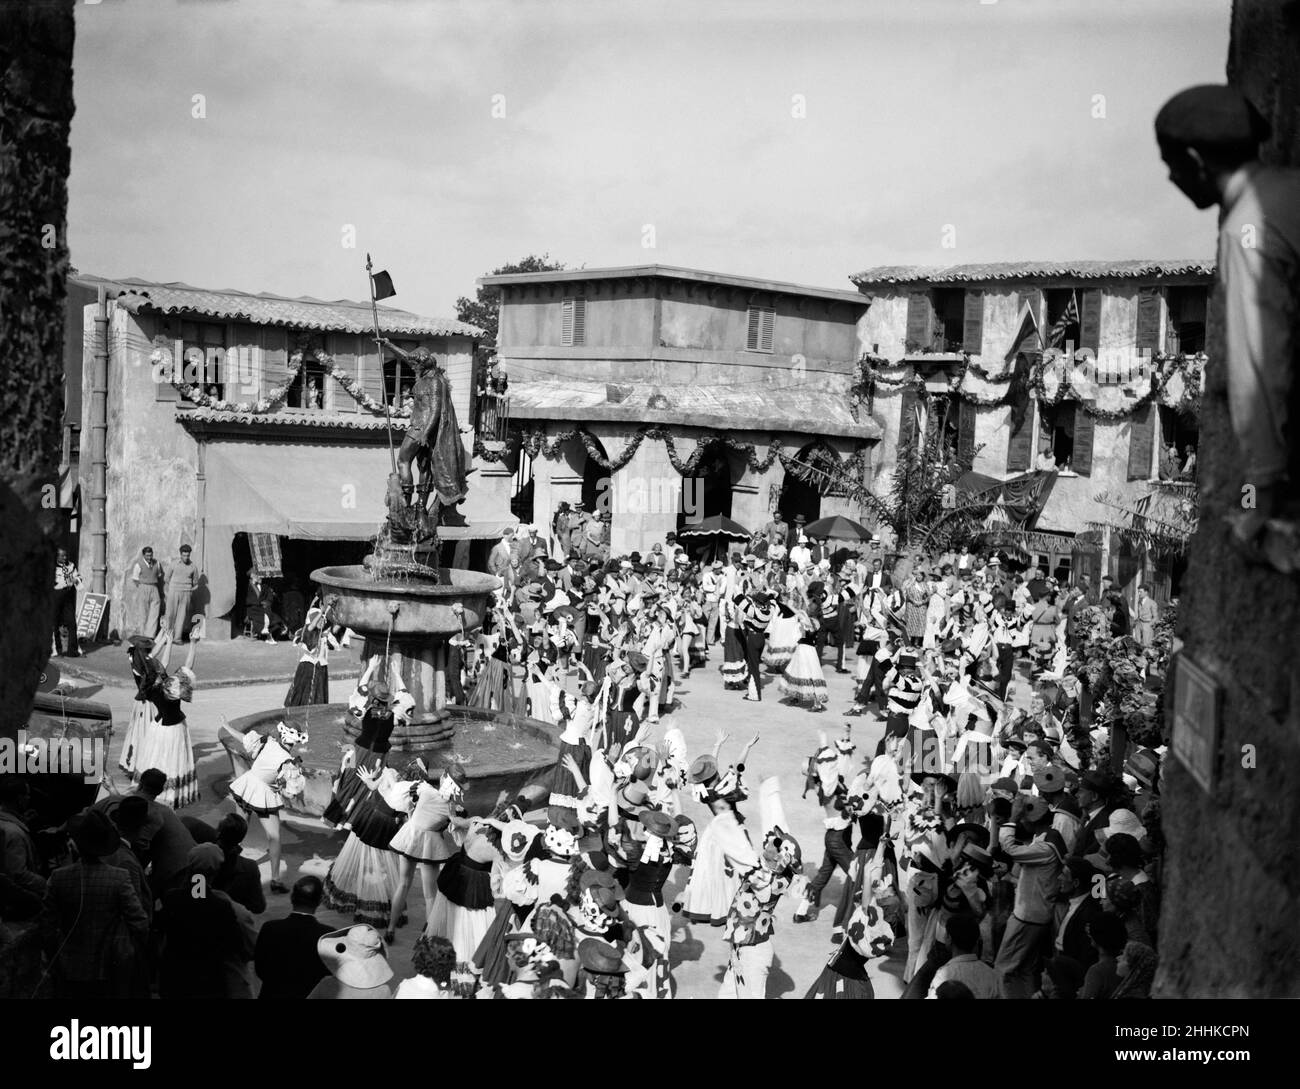 Filming of Brewster's Millions, directed by Thornton Freeland at British and Dominions Studios, Elstree, Hertfordshire, England, August 1934. Stock Photo